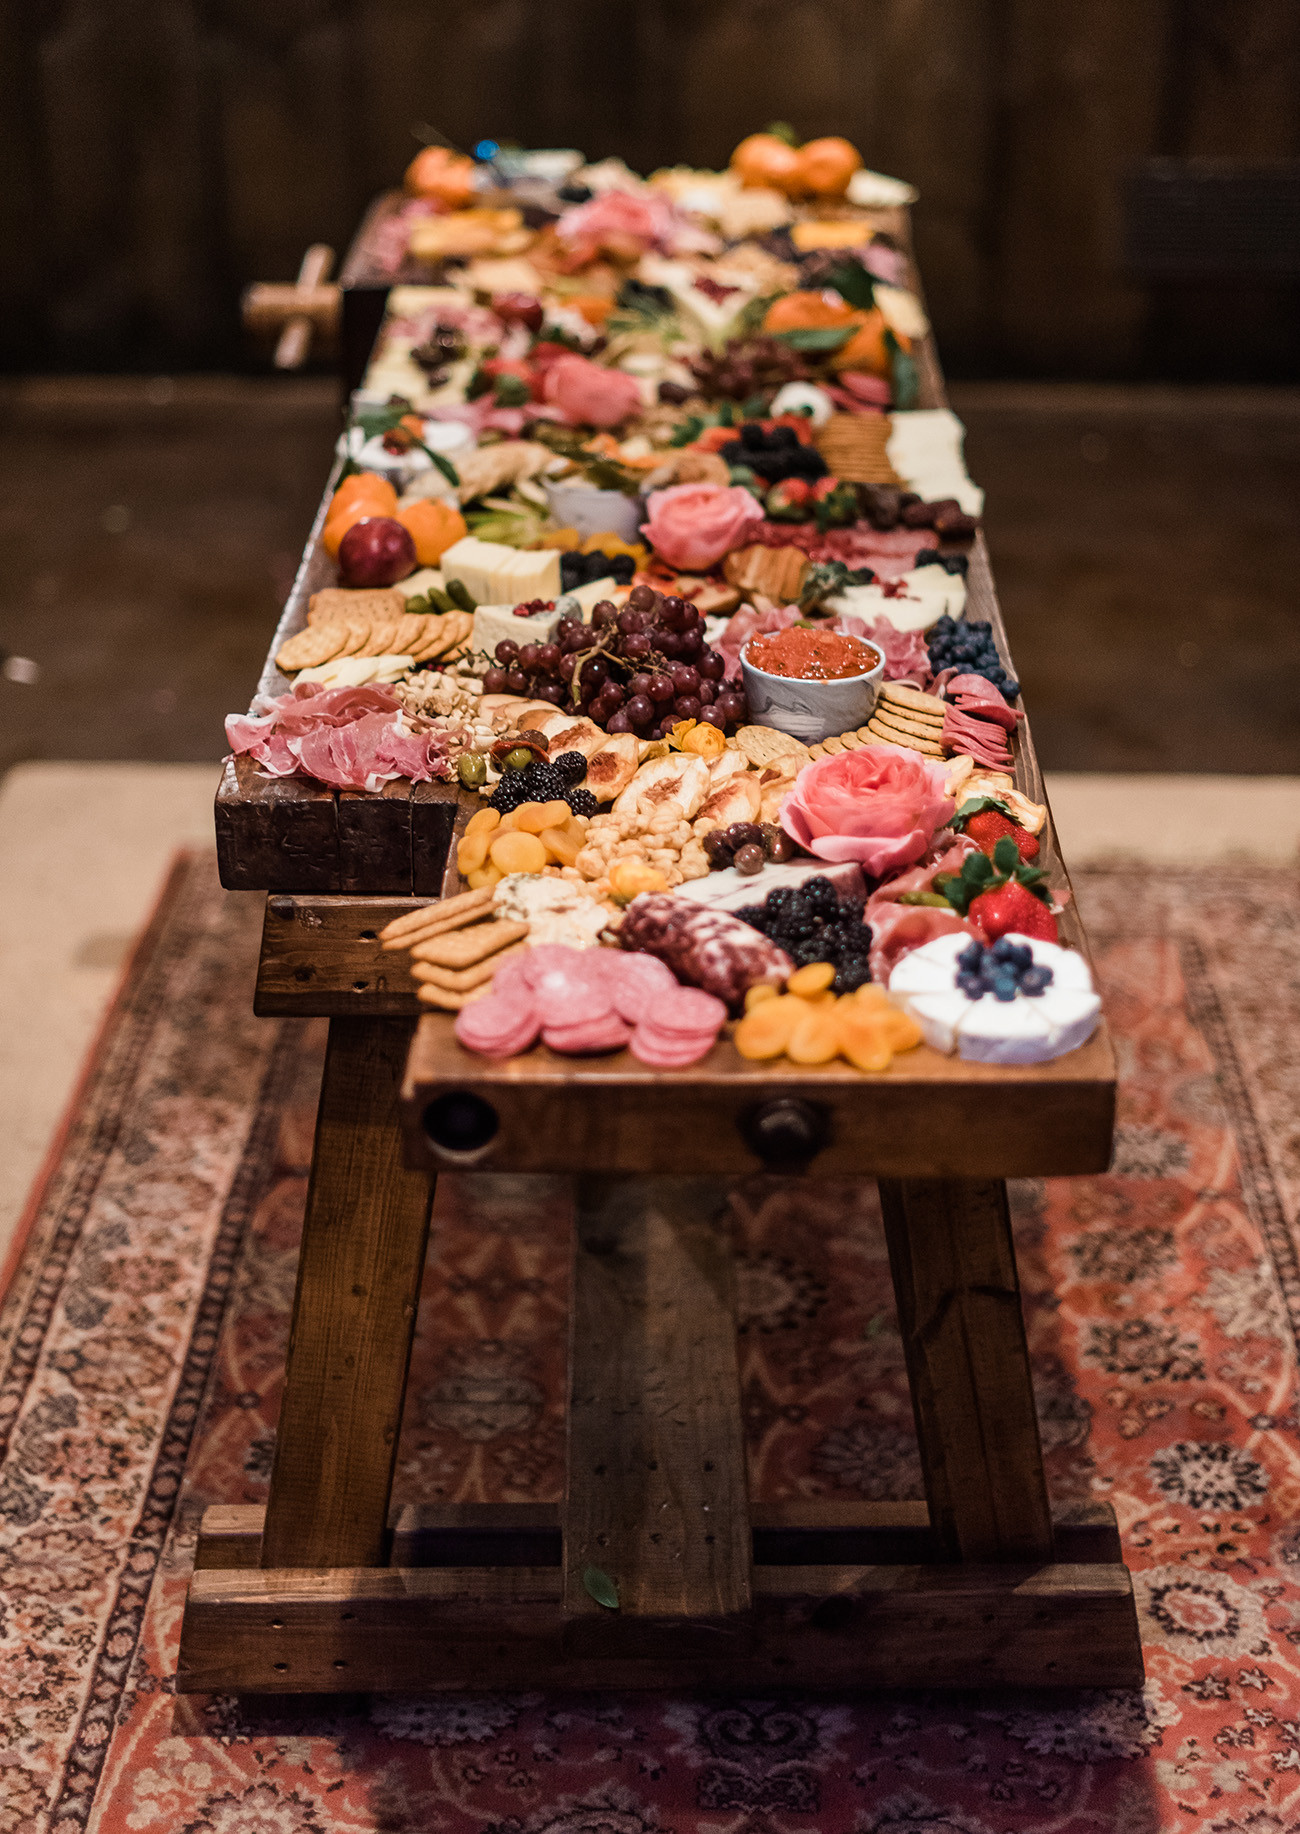 Engagement Dinner Party Ideas
 Feast for the Eyes Epic Grazing Tables are Taking Over